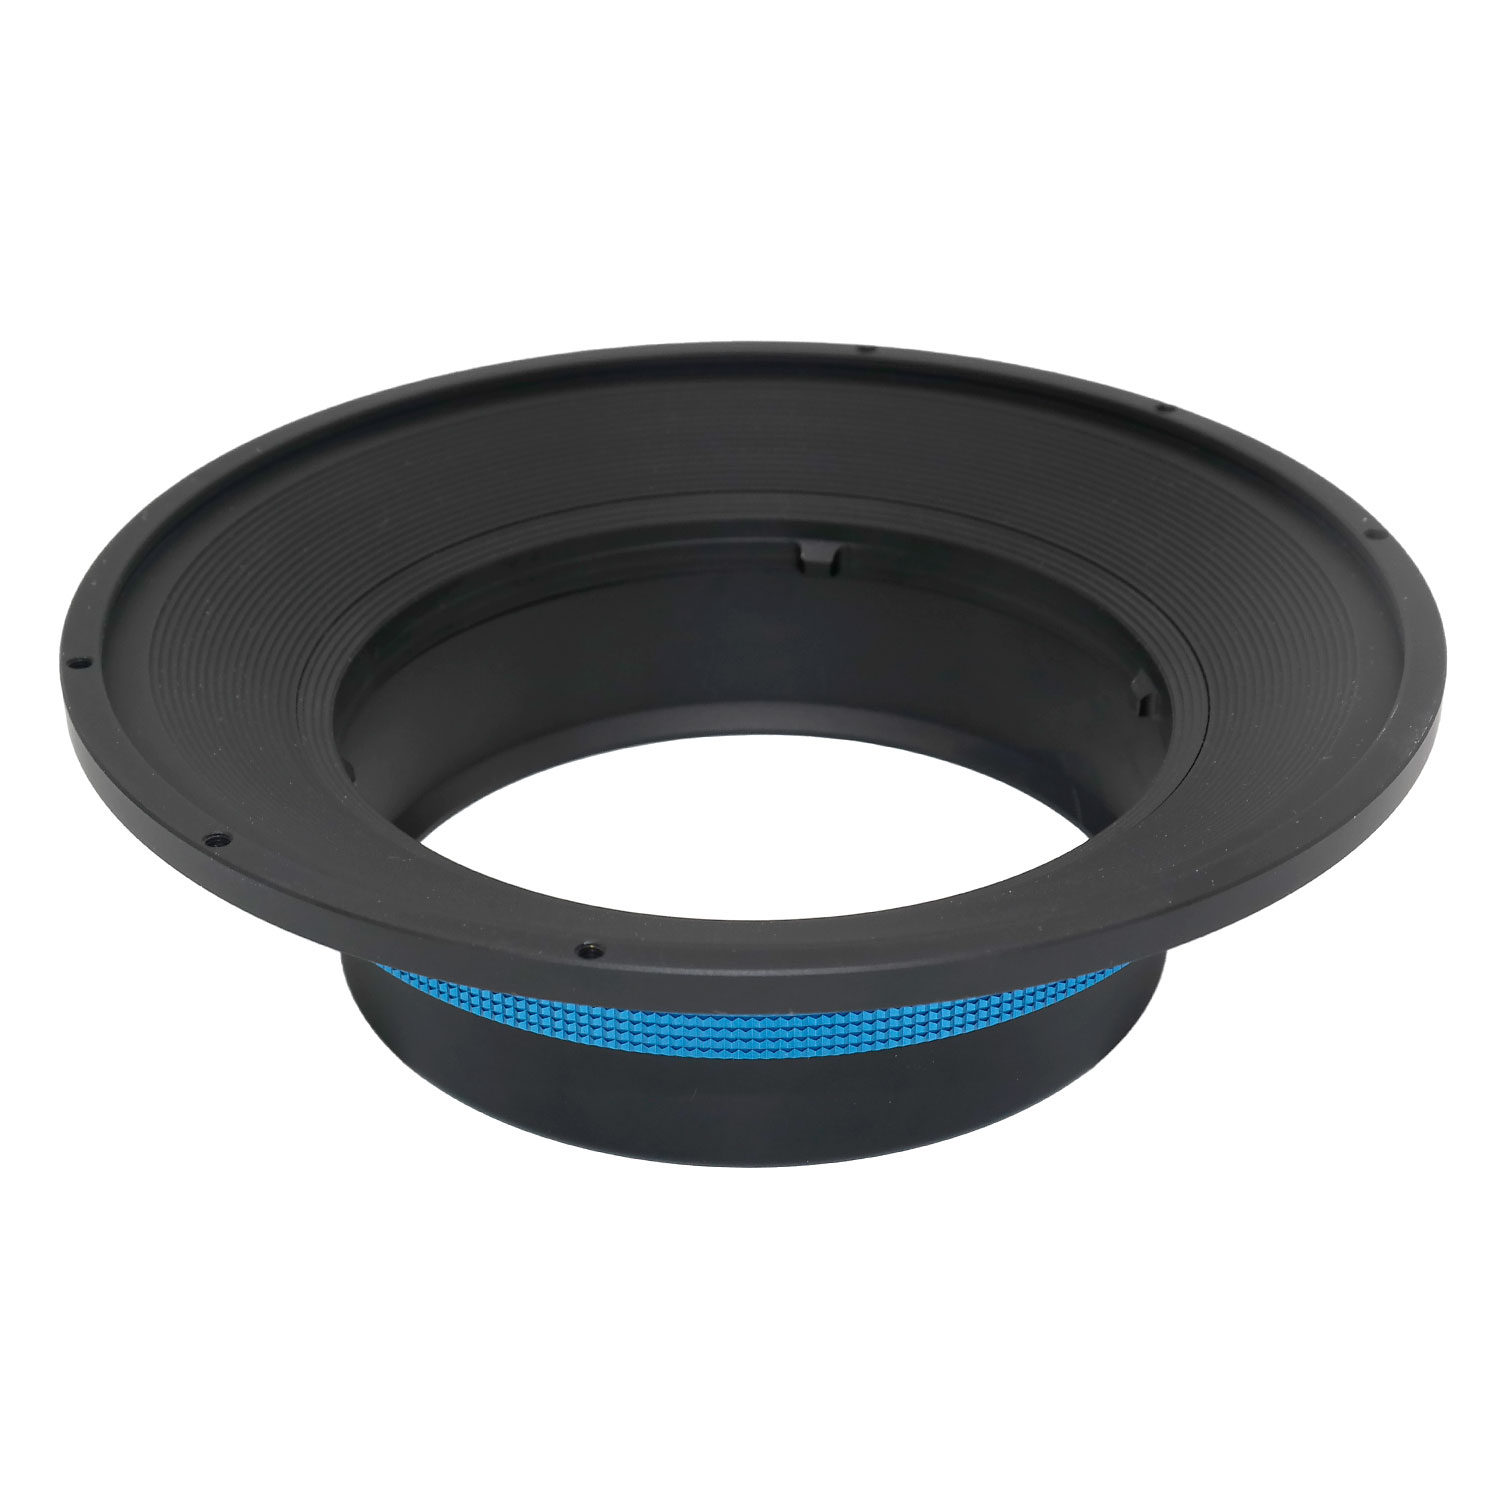 Image of Athabasca Filter Adapter System voor Tamron 15-30mm